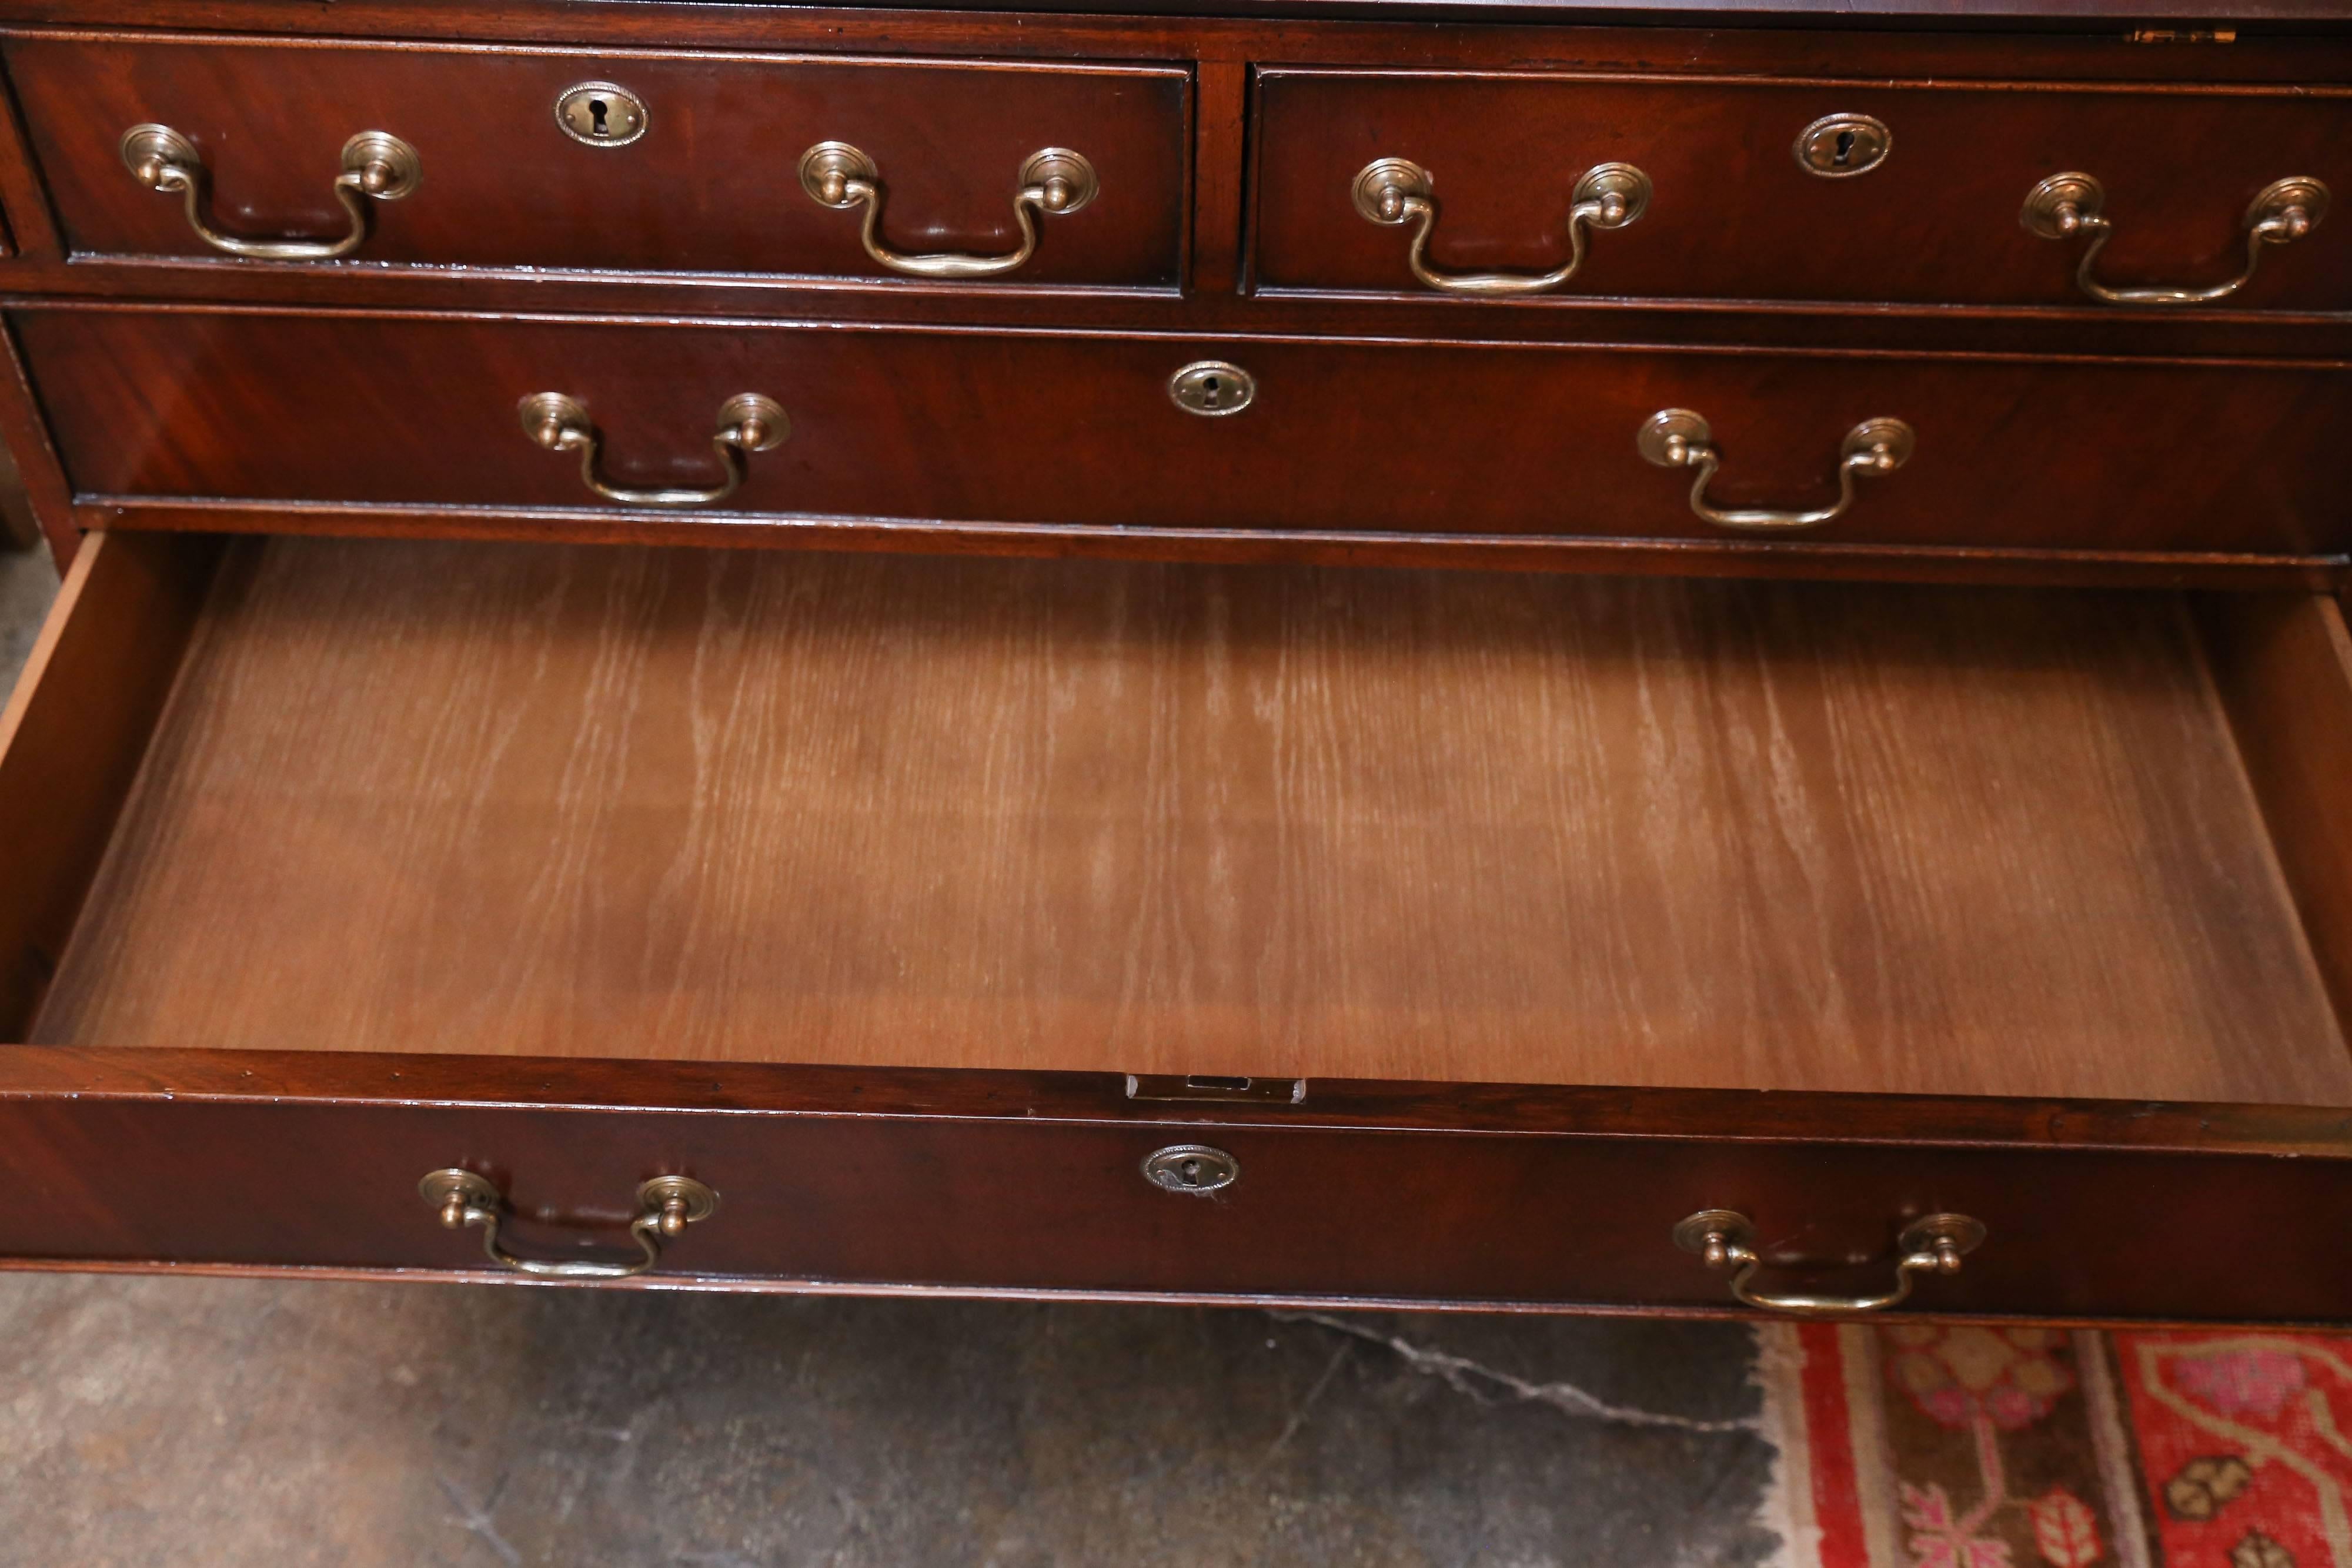 English mahogany secretary with very handsome desk details under slant top.

Upper cabinet includes three mahogany shelves, a dentil molding top
and crowned glass.

Base features three small and three long drawers.

Designed and imported by